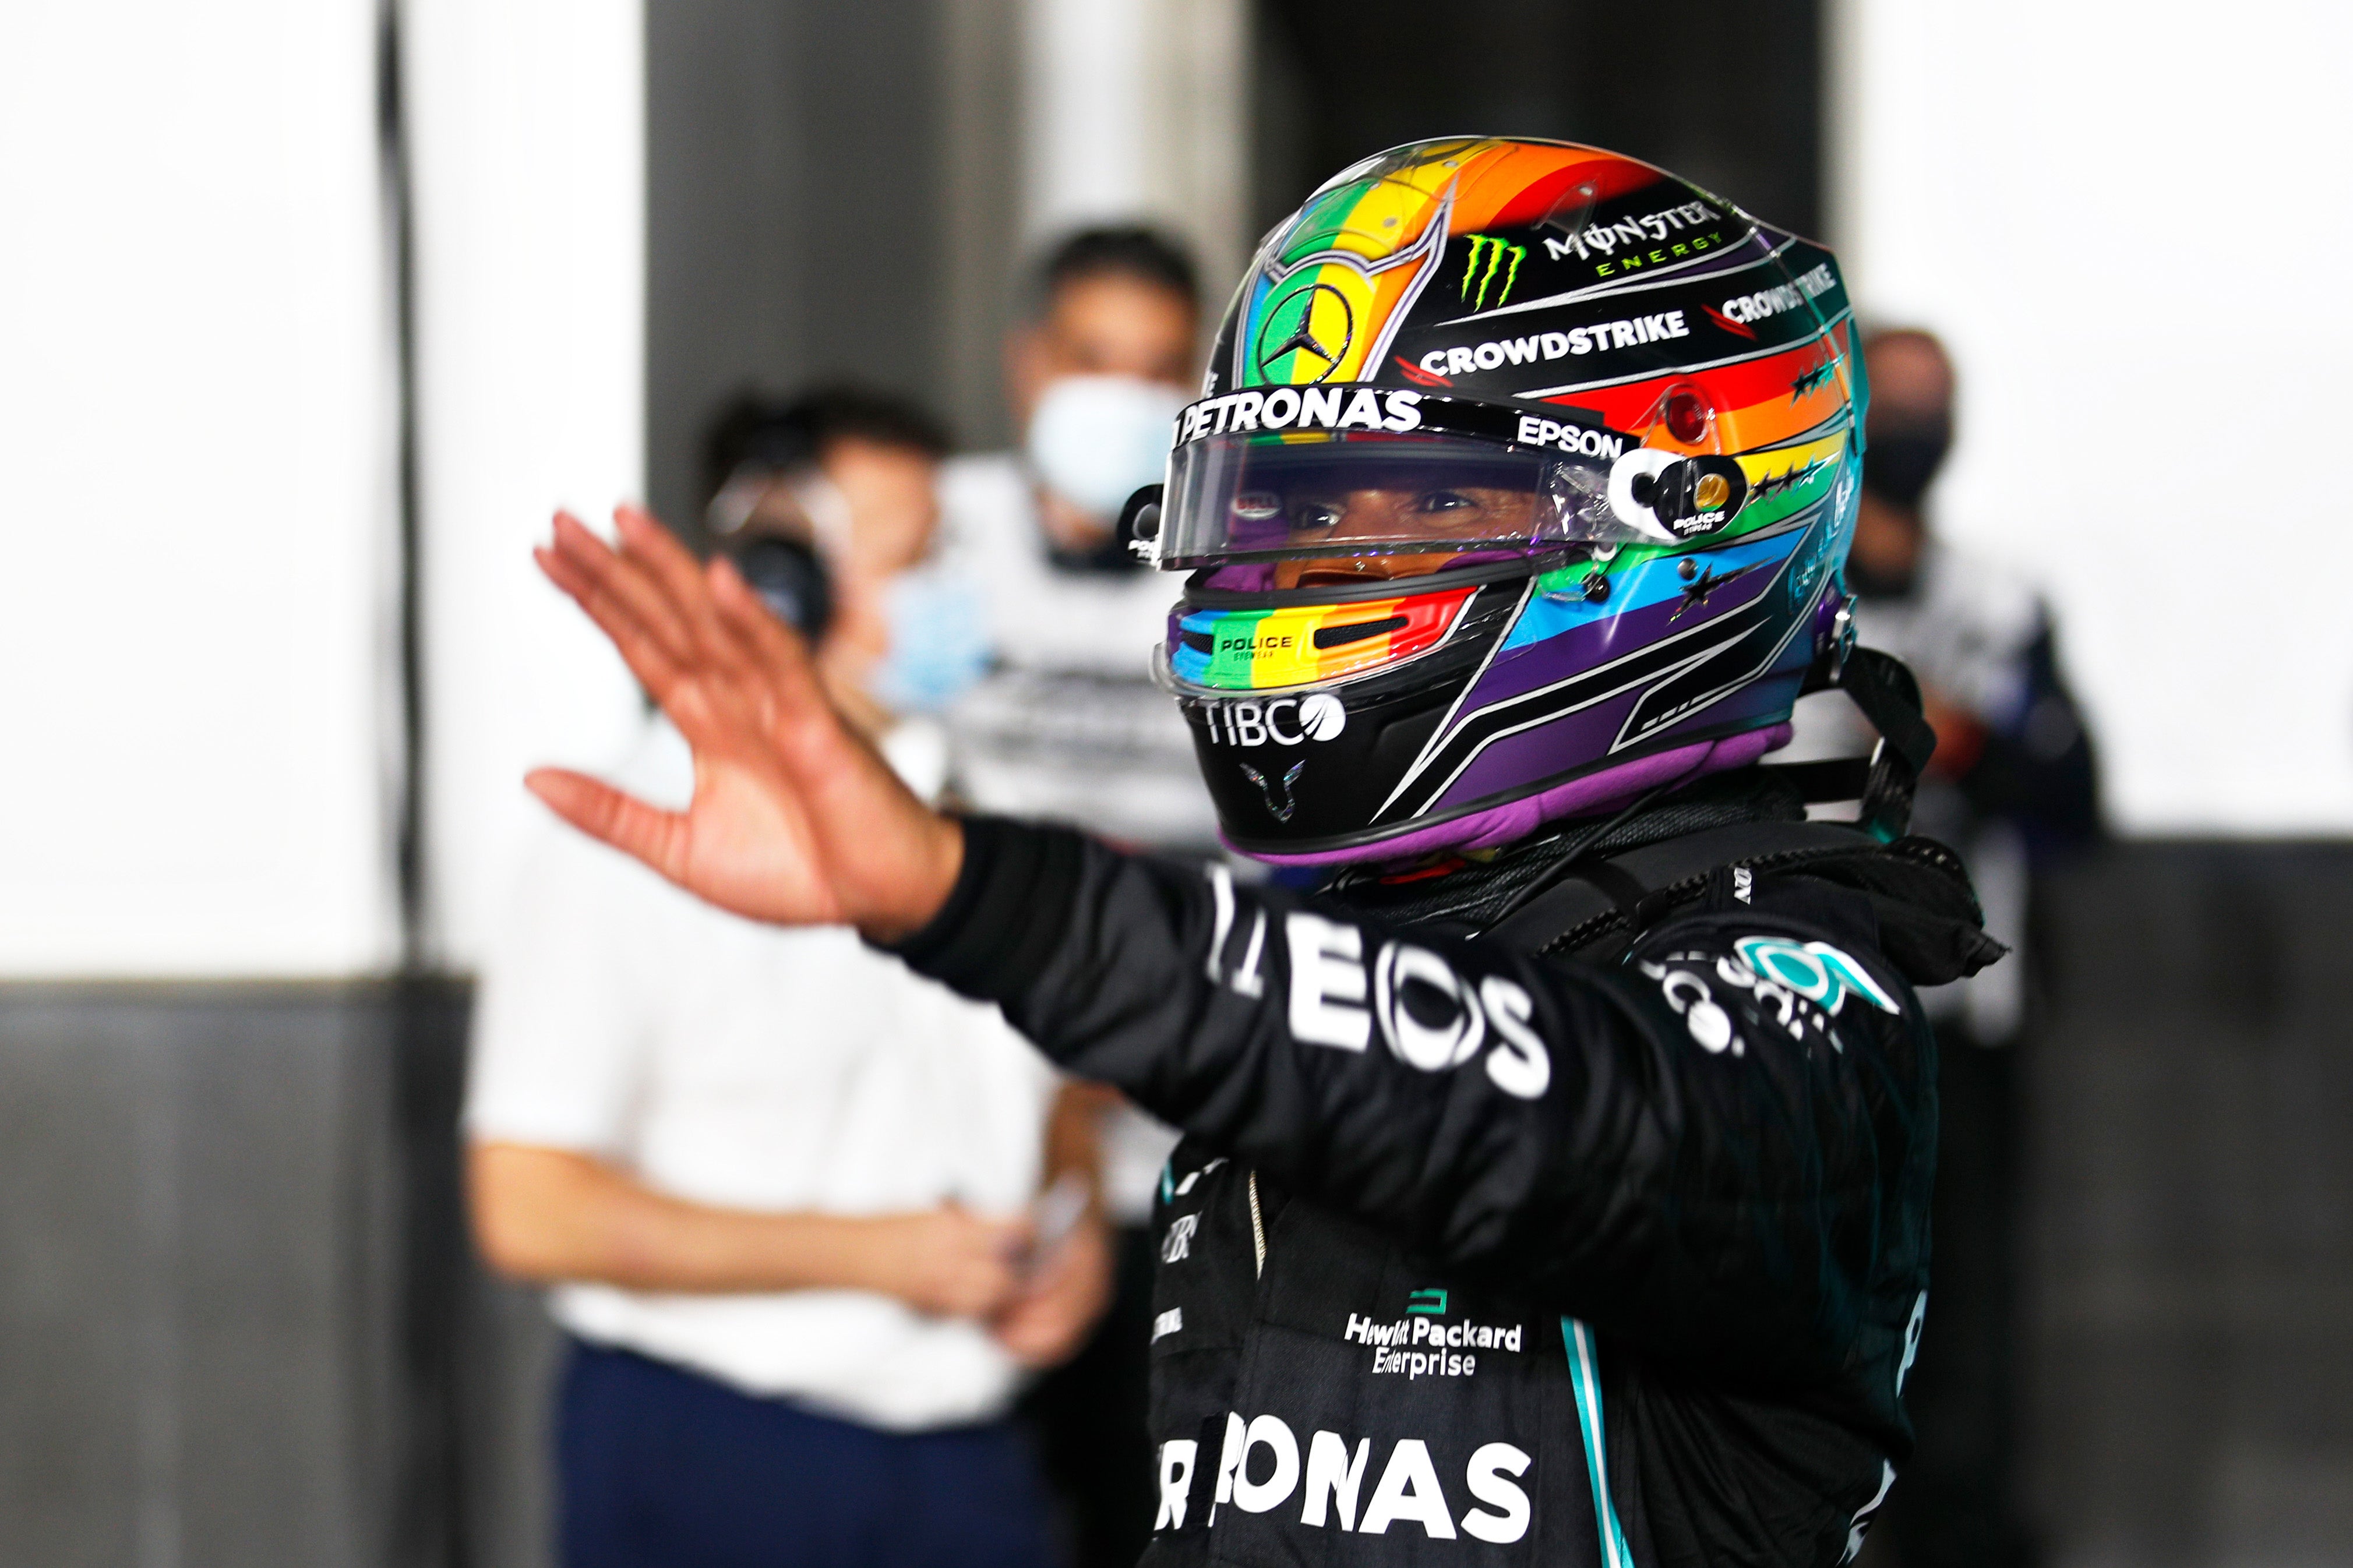 Lewis Hamilton wore a rainbow helmet in Qatar in 2021 in support of LGBTQ rights